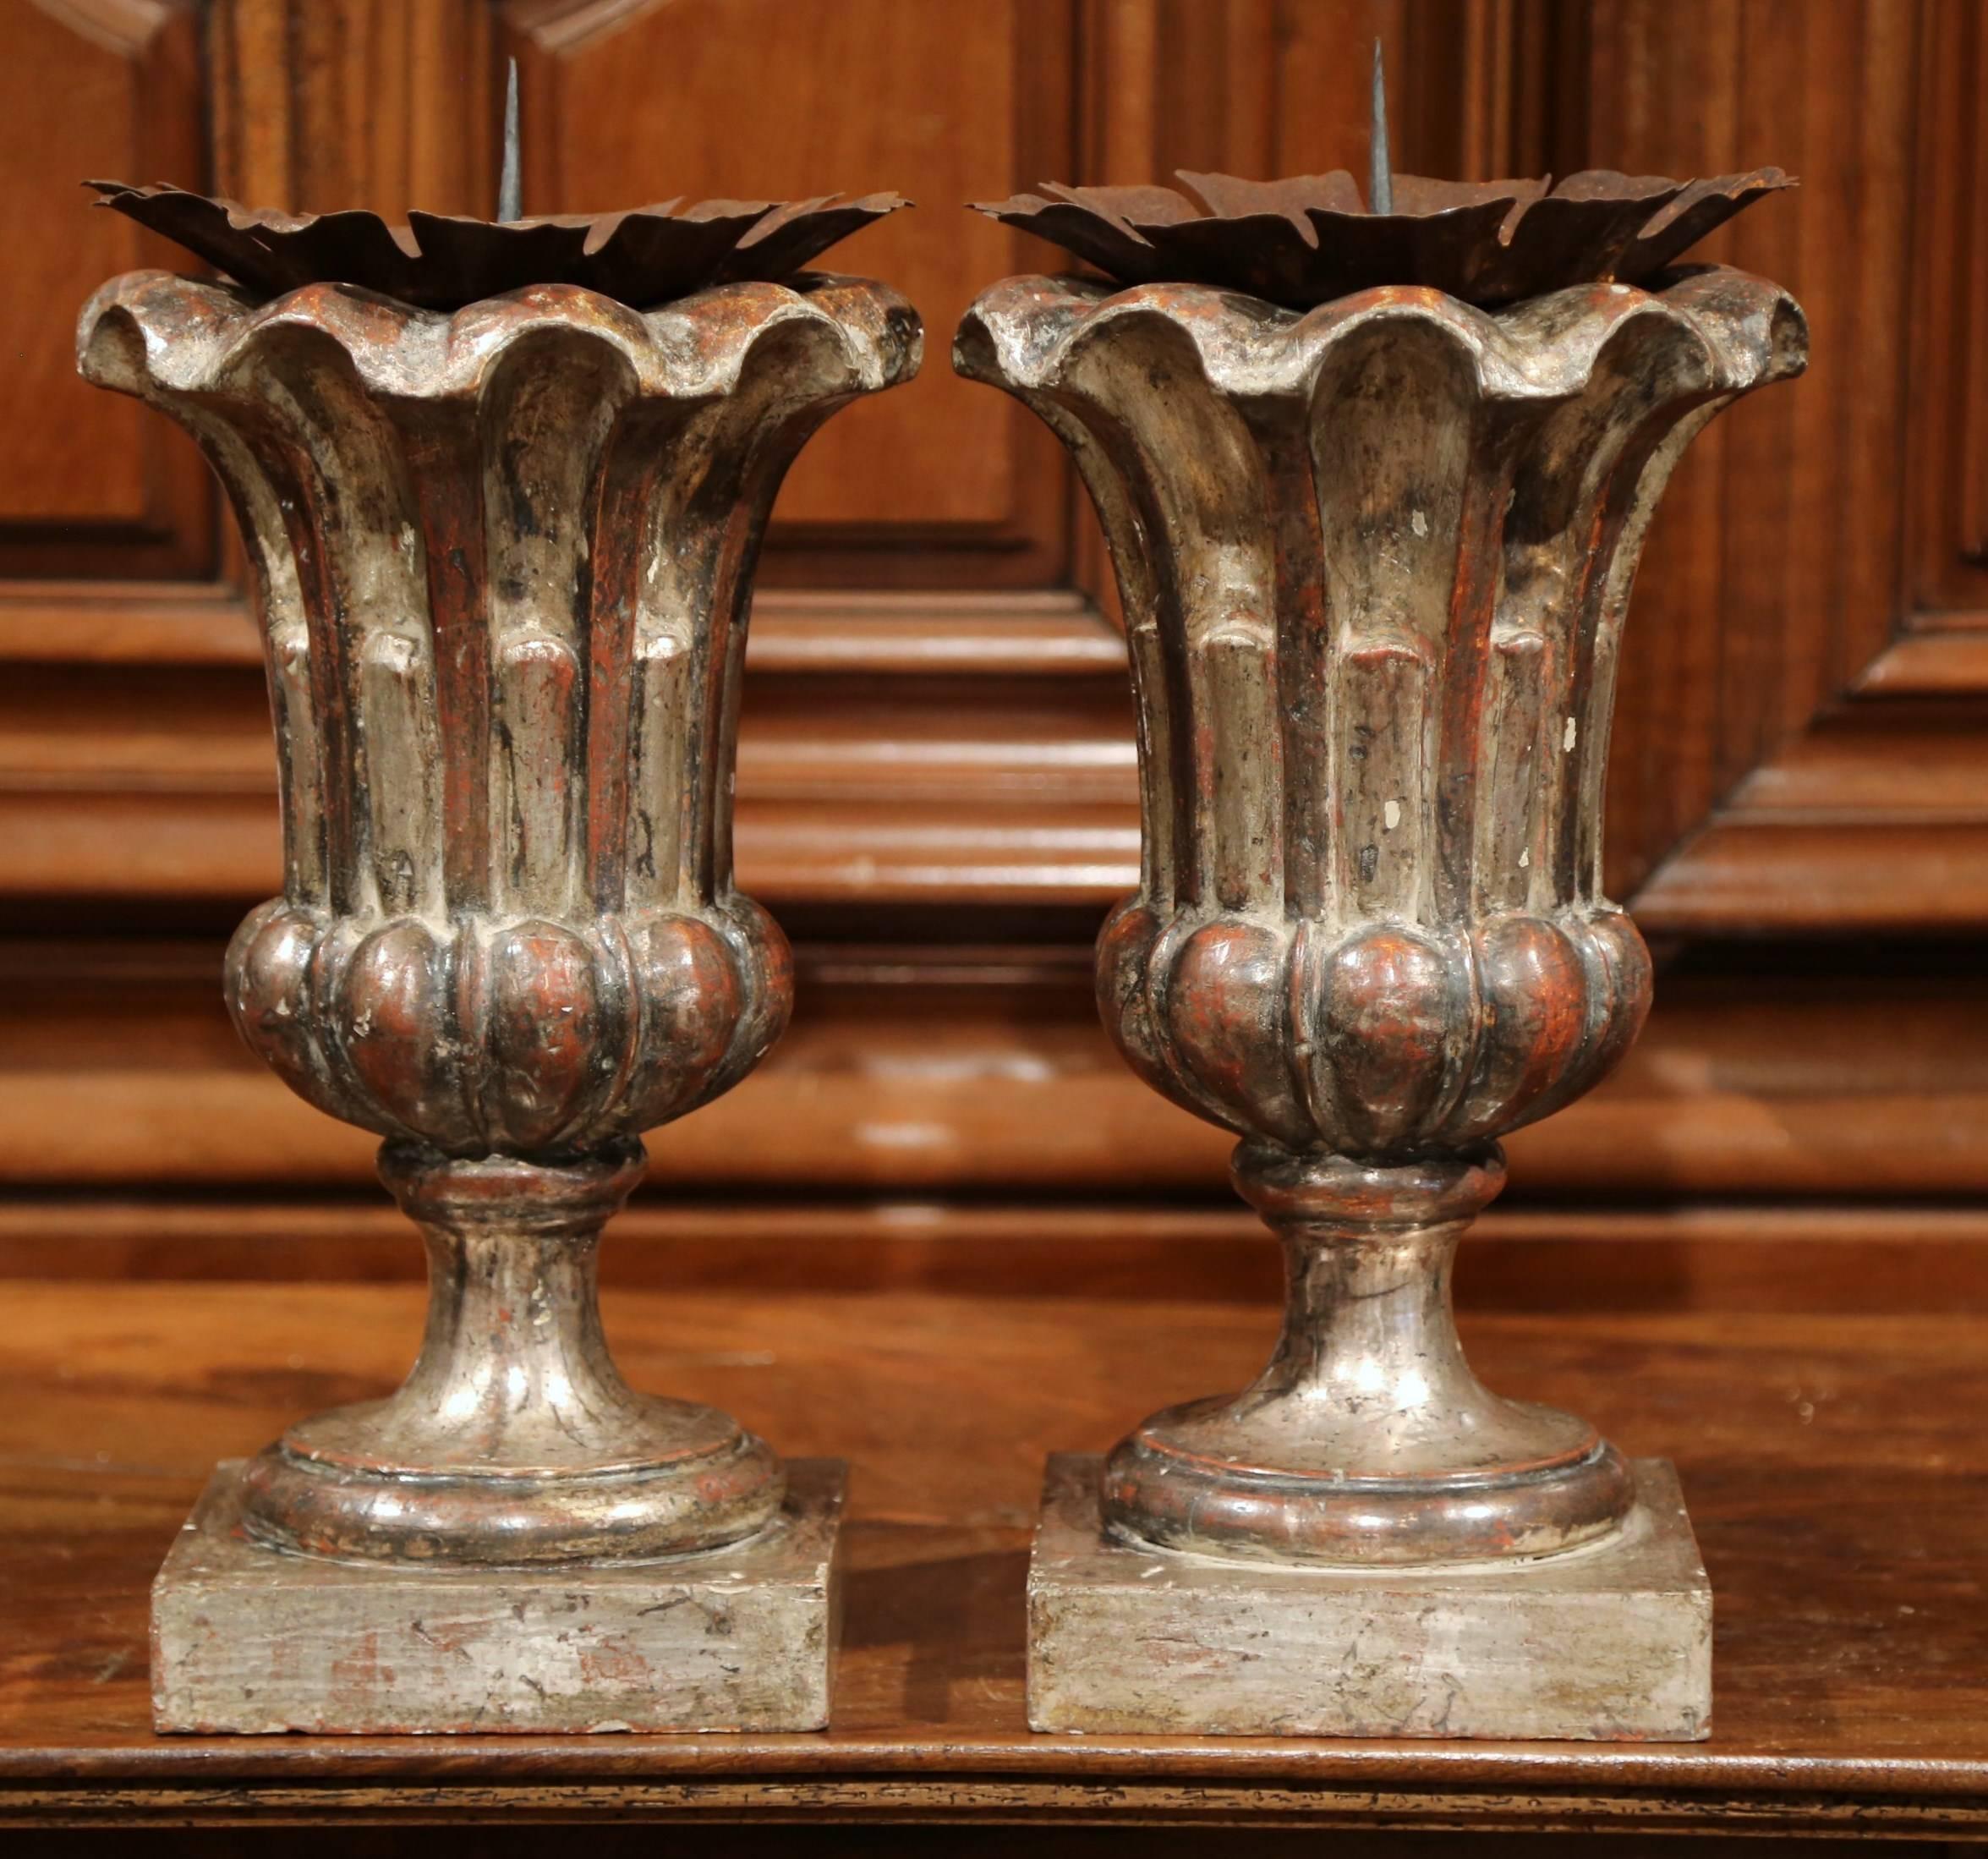 Contemporary Pair of Italian Hand-Carved Silver Leaf Pricket Candlesticks with Metal Bobeches